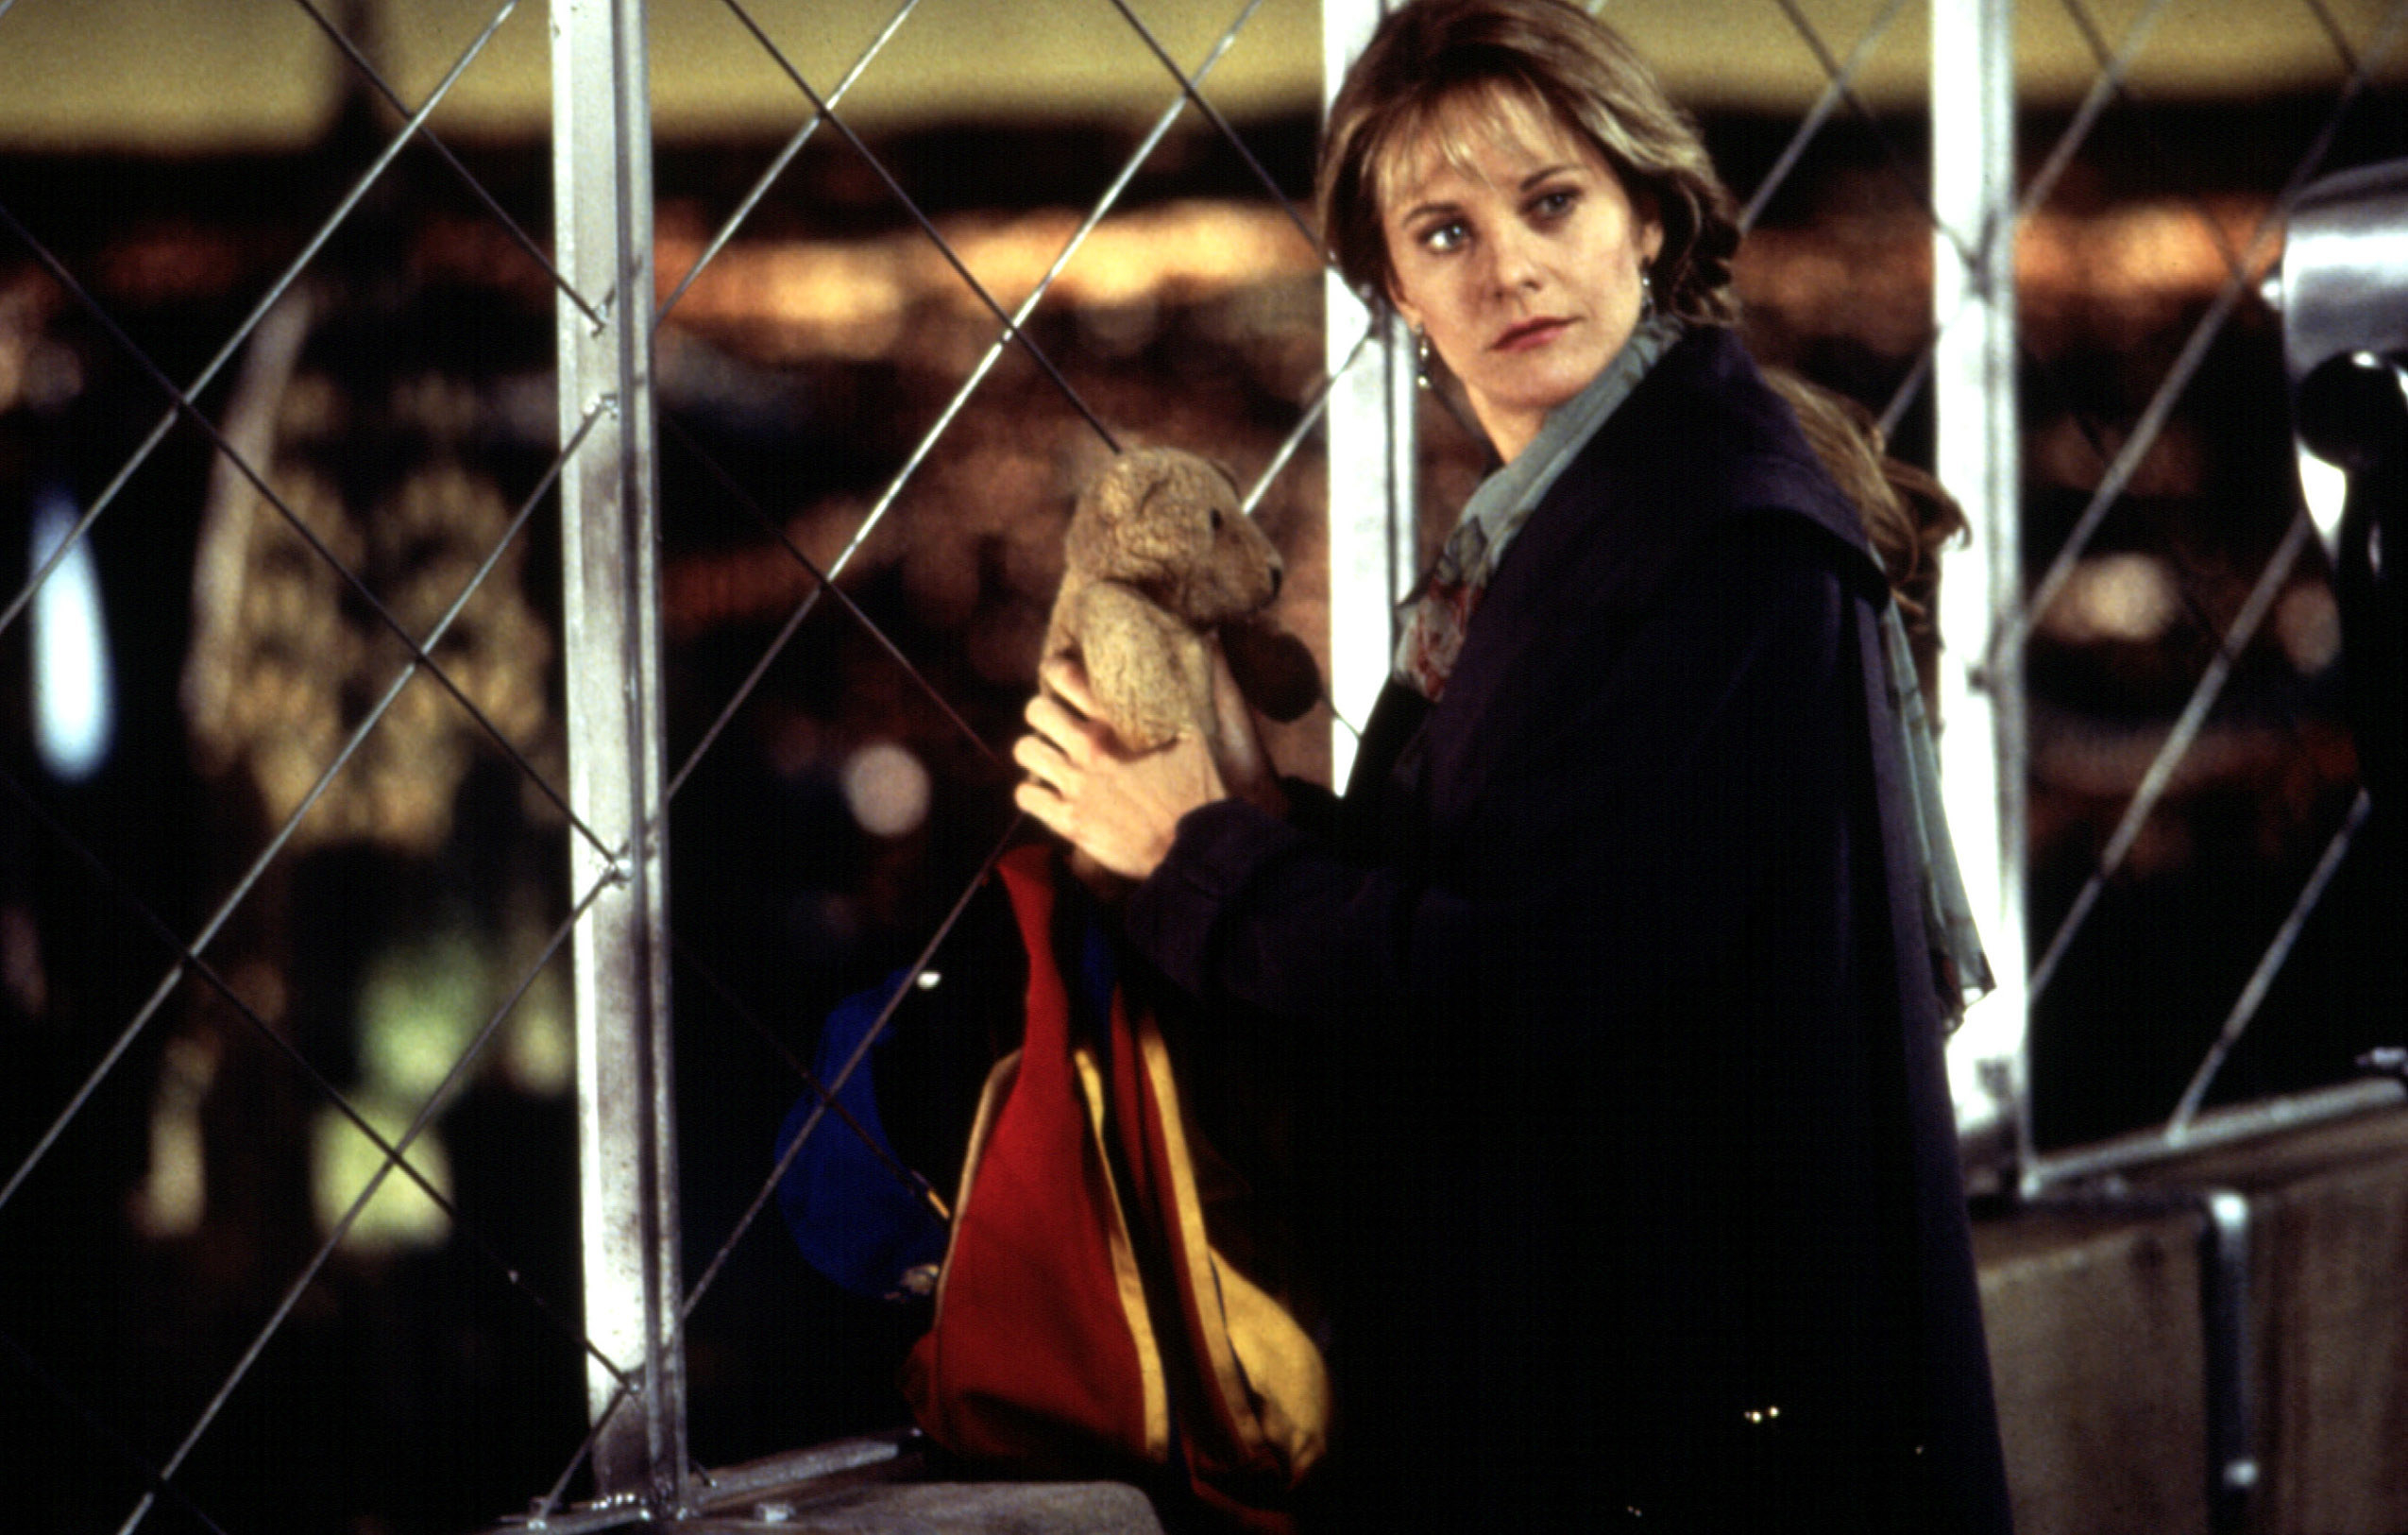 A woman holds a teddy bear, looking back at someone off screen